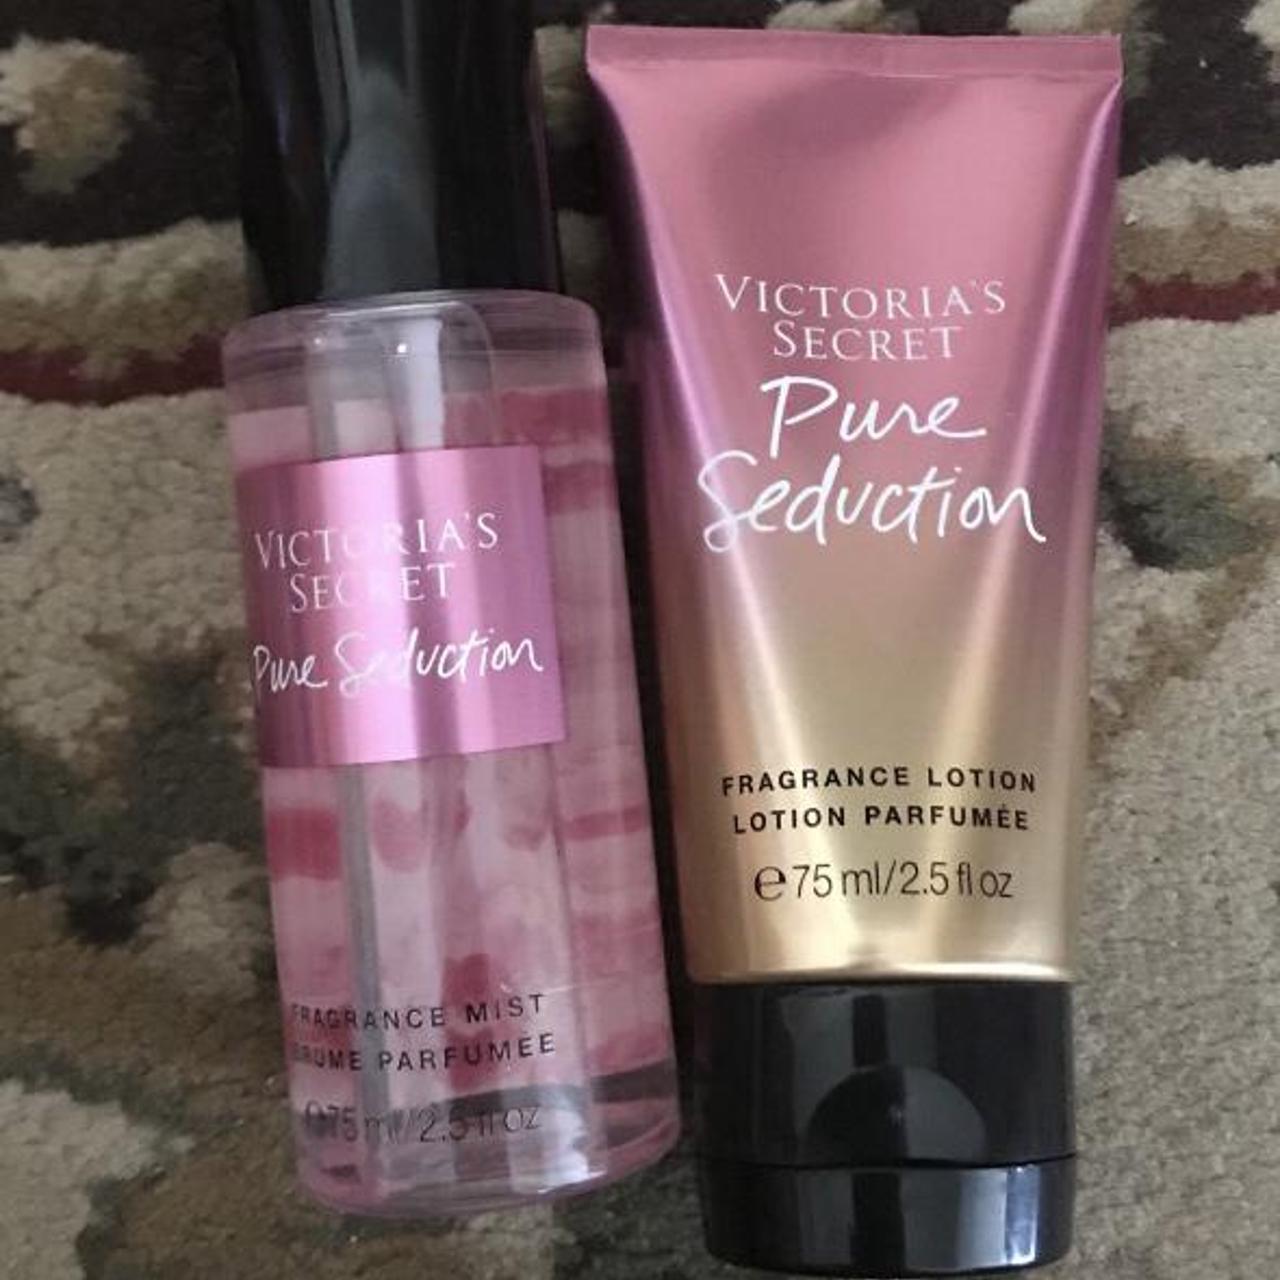 Victoria's Secret Pink and White Fragrance